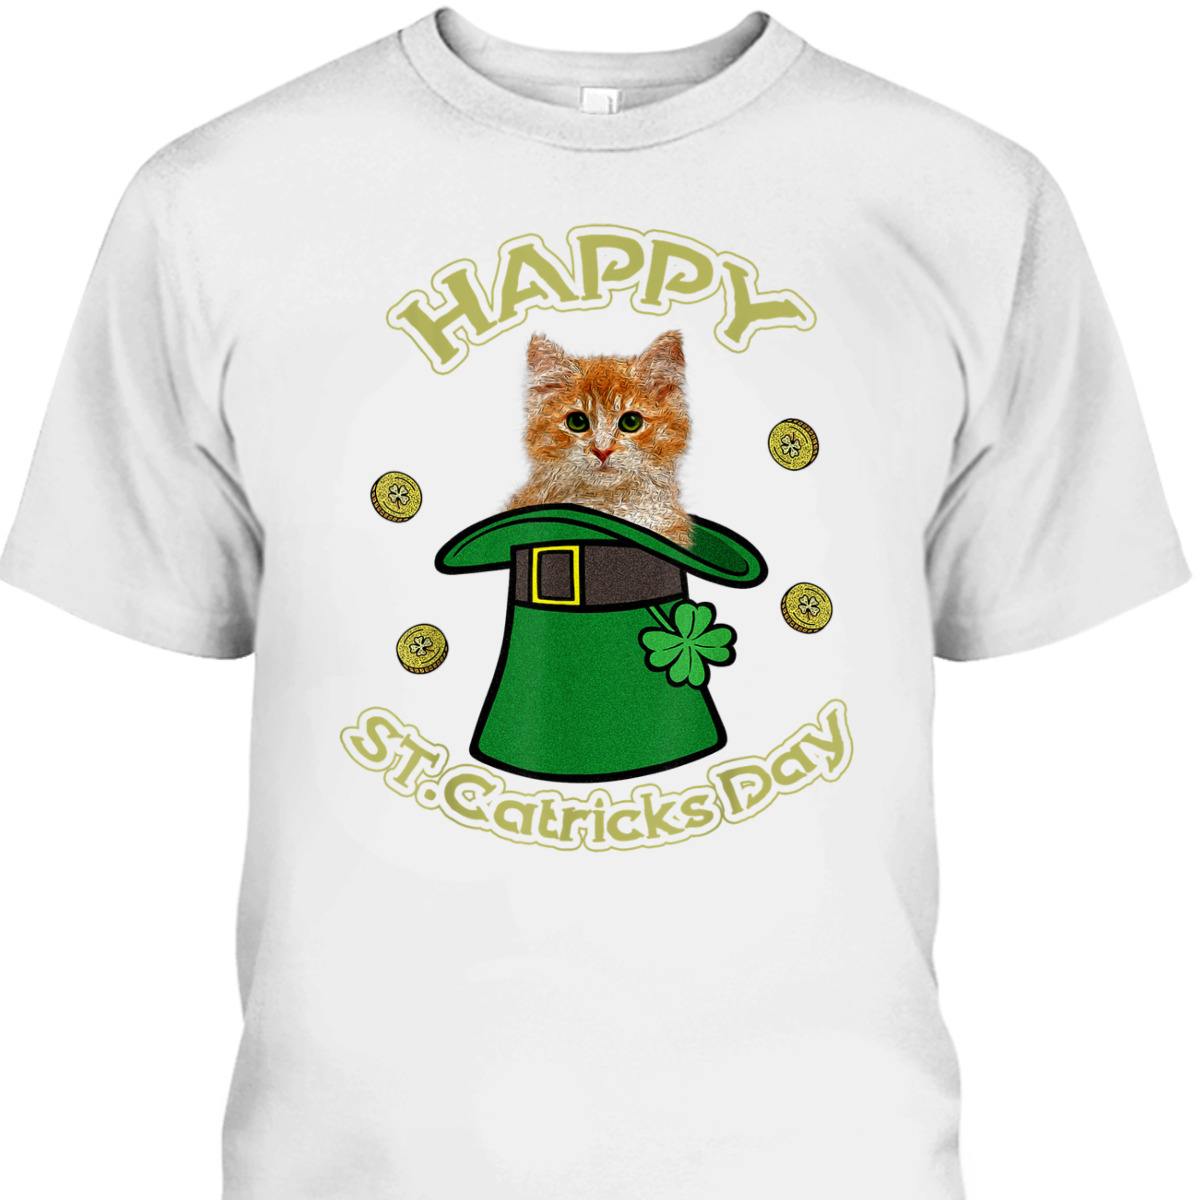 Happy St Catrick's Patrick's Day T-Shirt Gift For Cat Lovers